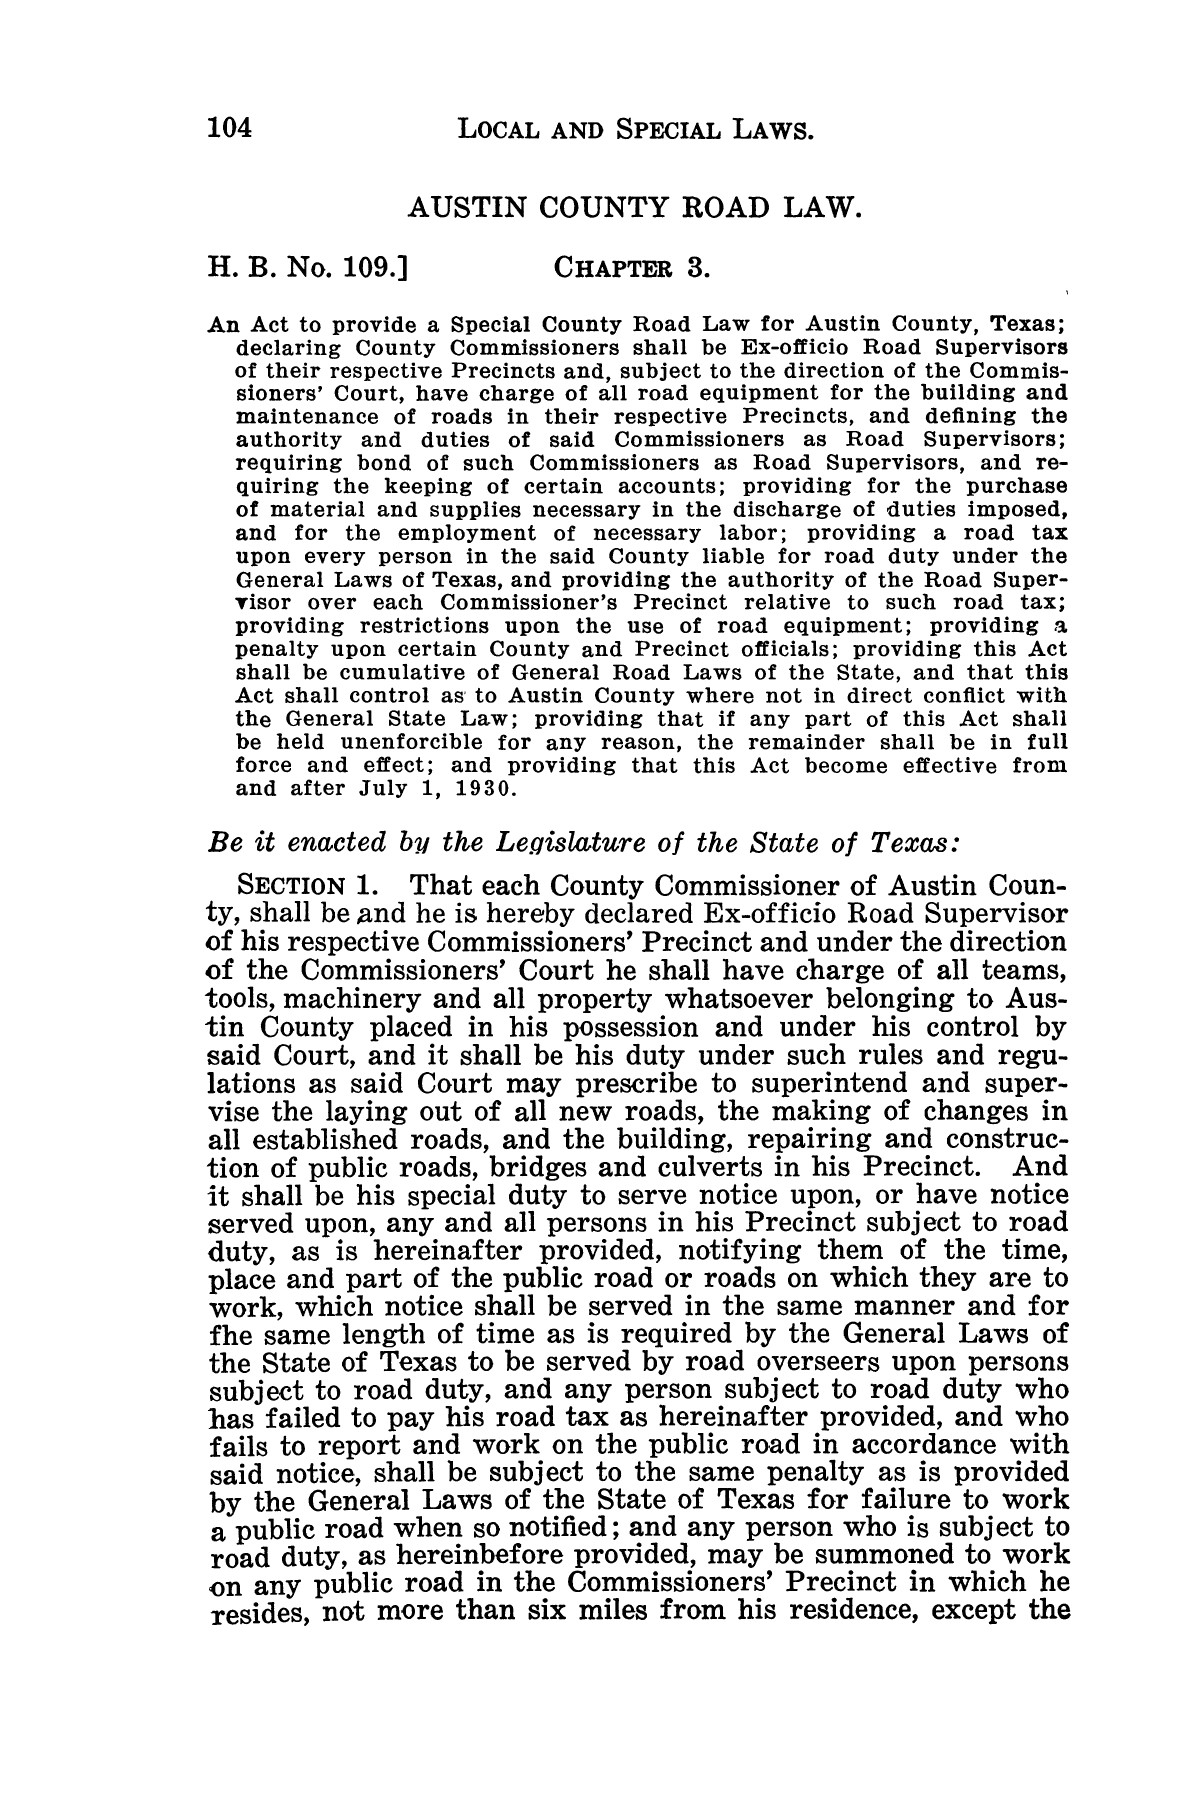 The Laws of Texas, 1929-1931 [Volume 27]
                                                
                                                    [Sequence #]: 418 of 1943
                                                